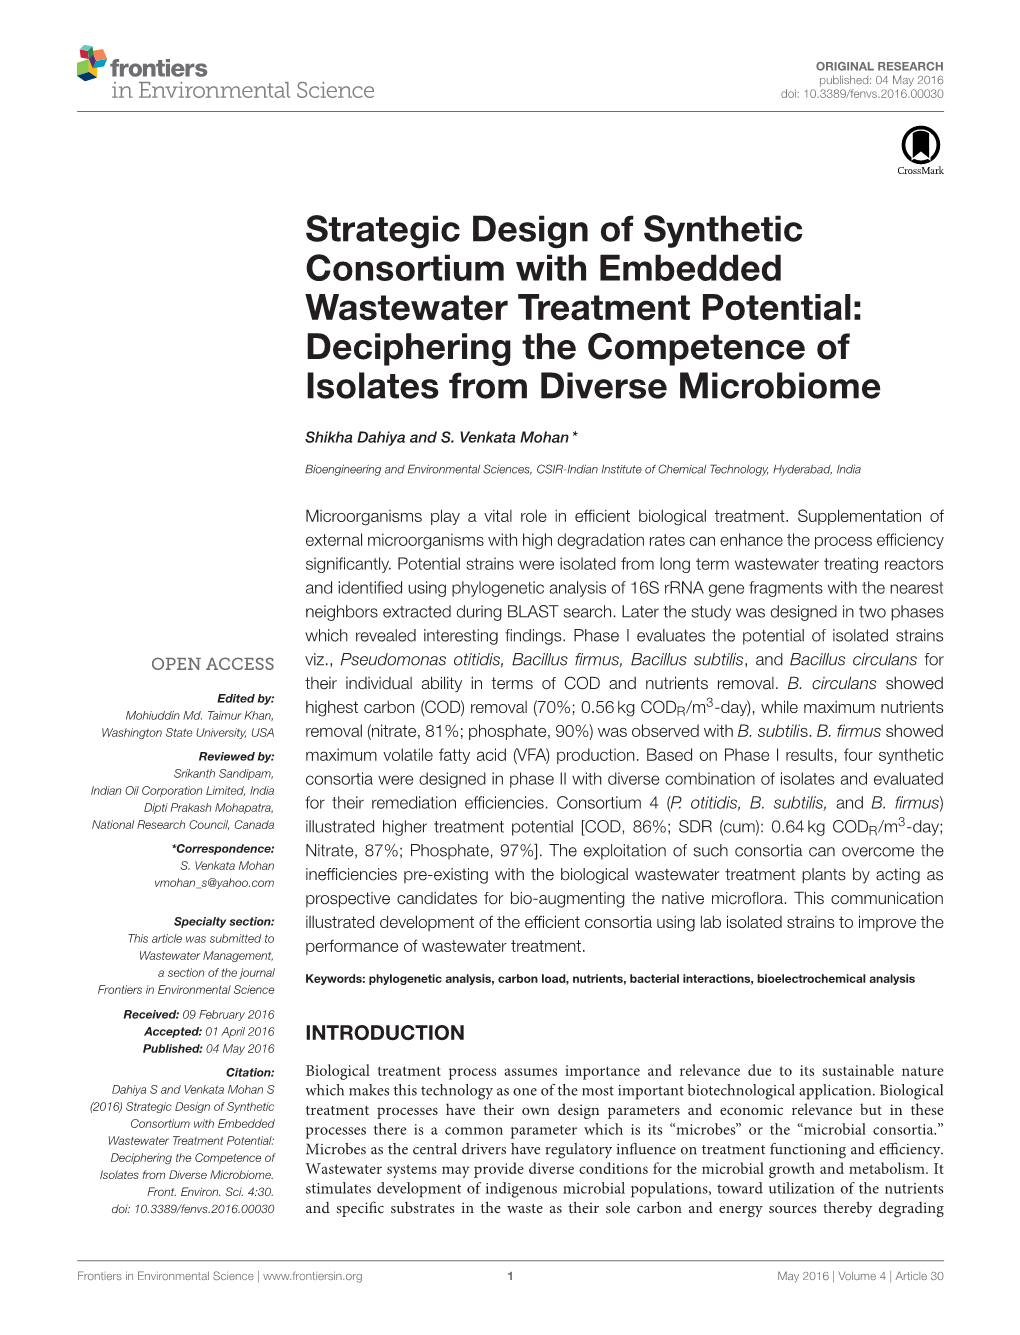 Strategic Design of Synthetic Consortium with Embedded Wastewater Treatment Potential: Deciphering the Competence of Isolates from Diverse Microbiome